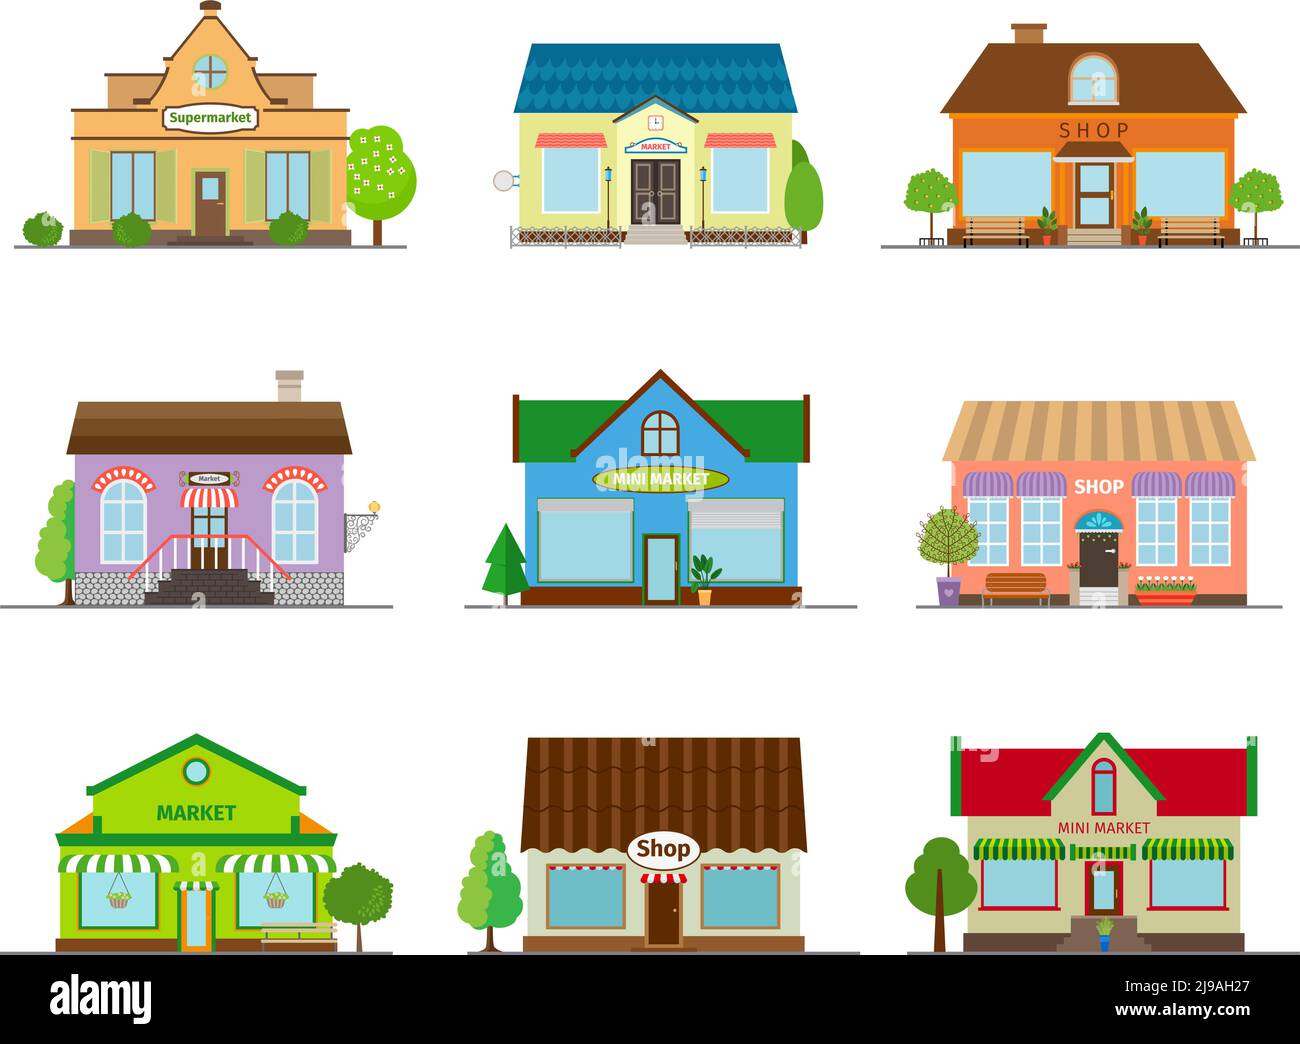 Stores and shops buildings. Business street retail, architecture market and showcase. Vector illustration Stock Vector